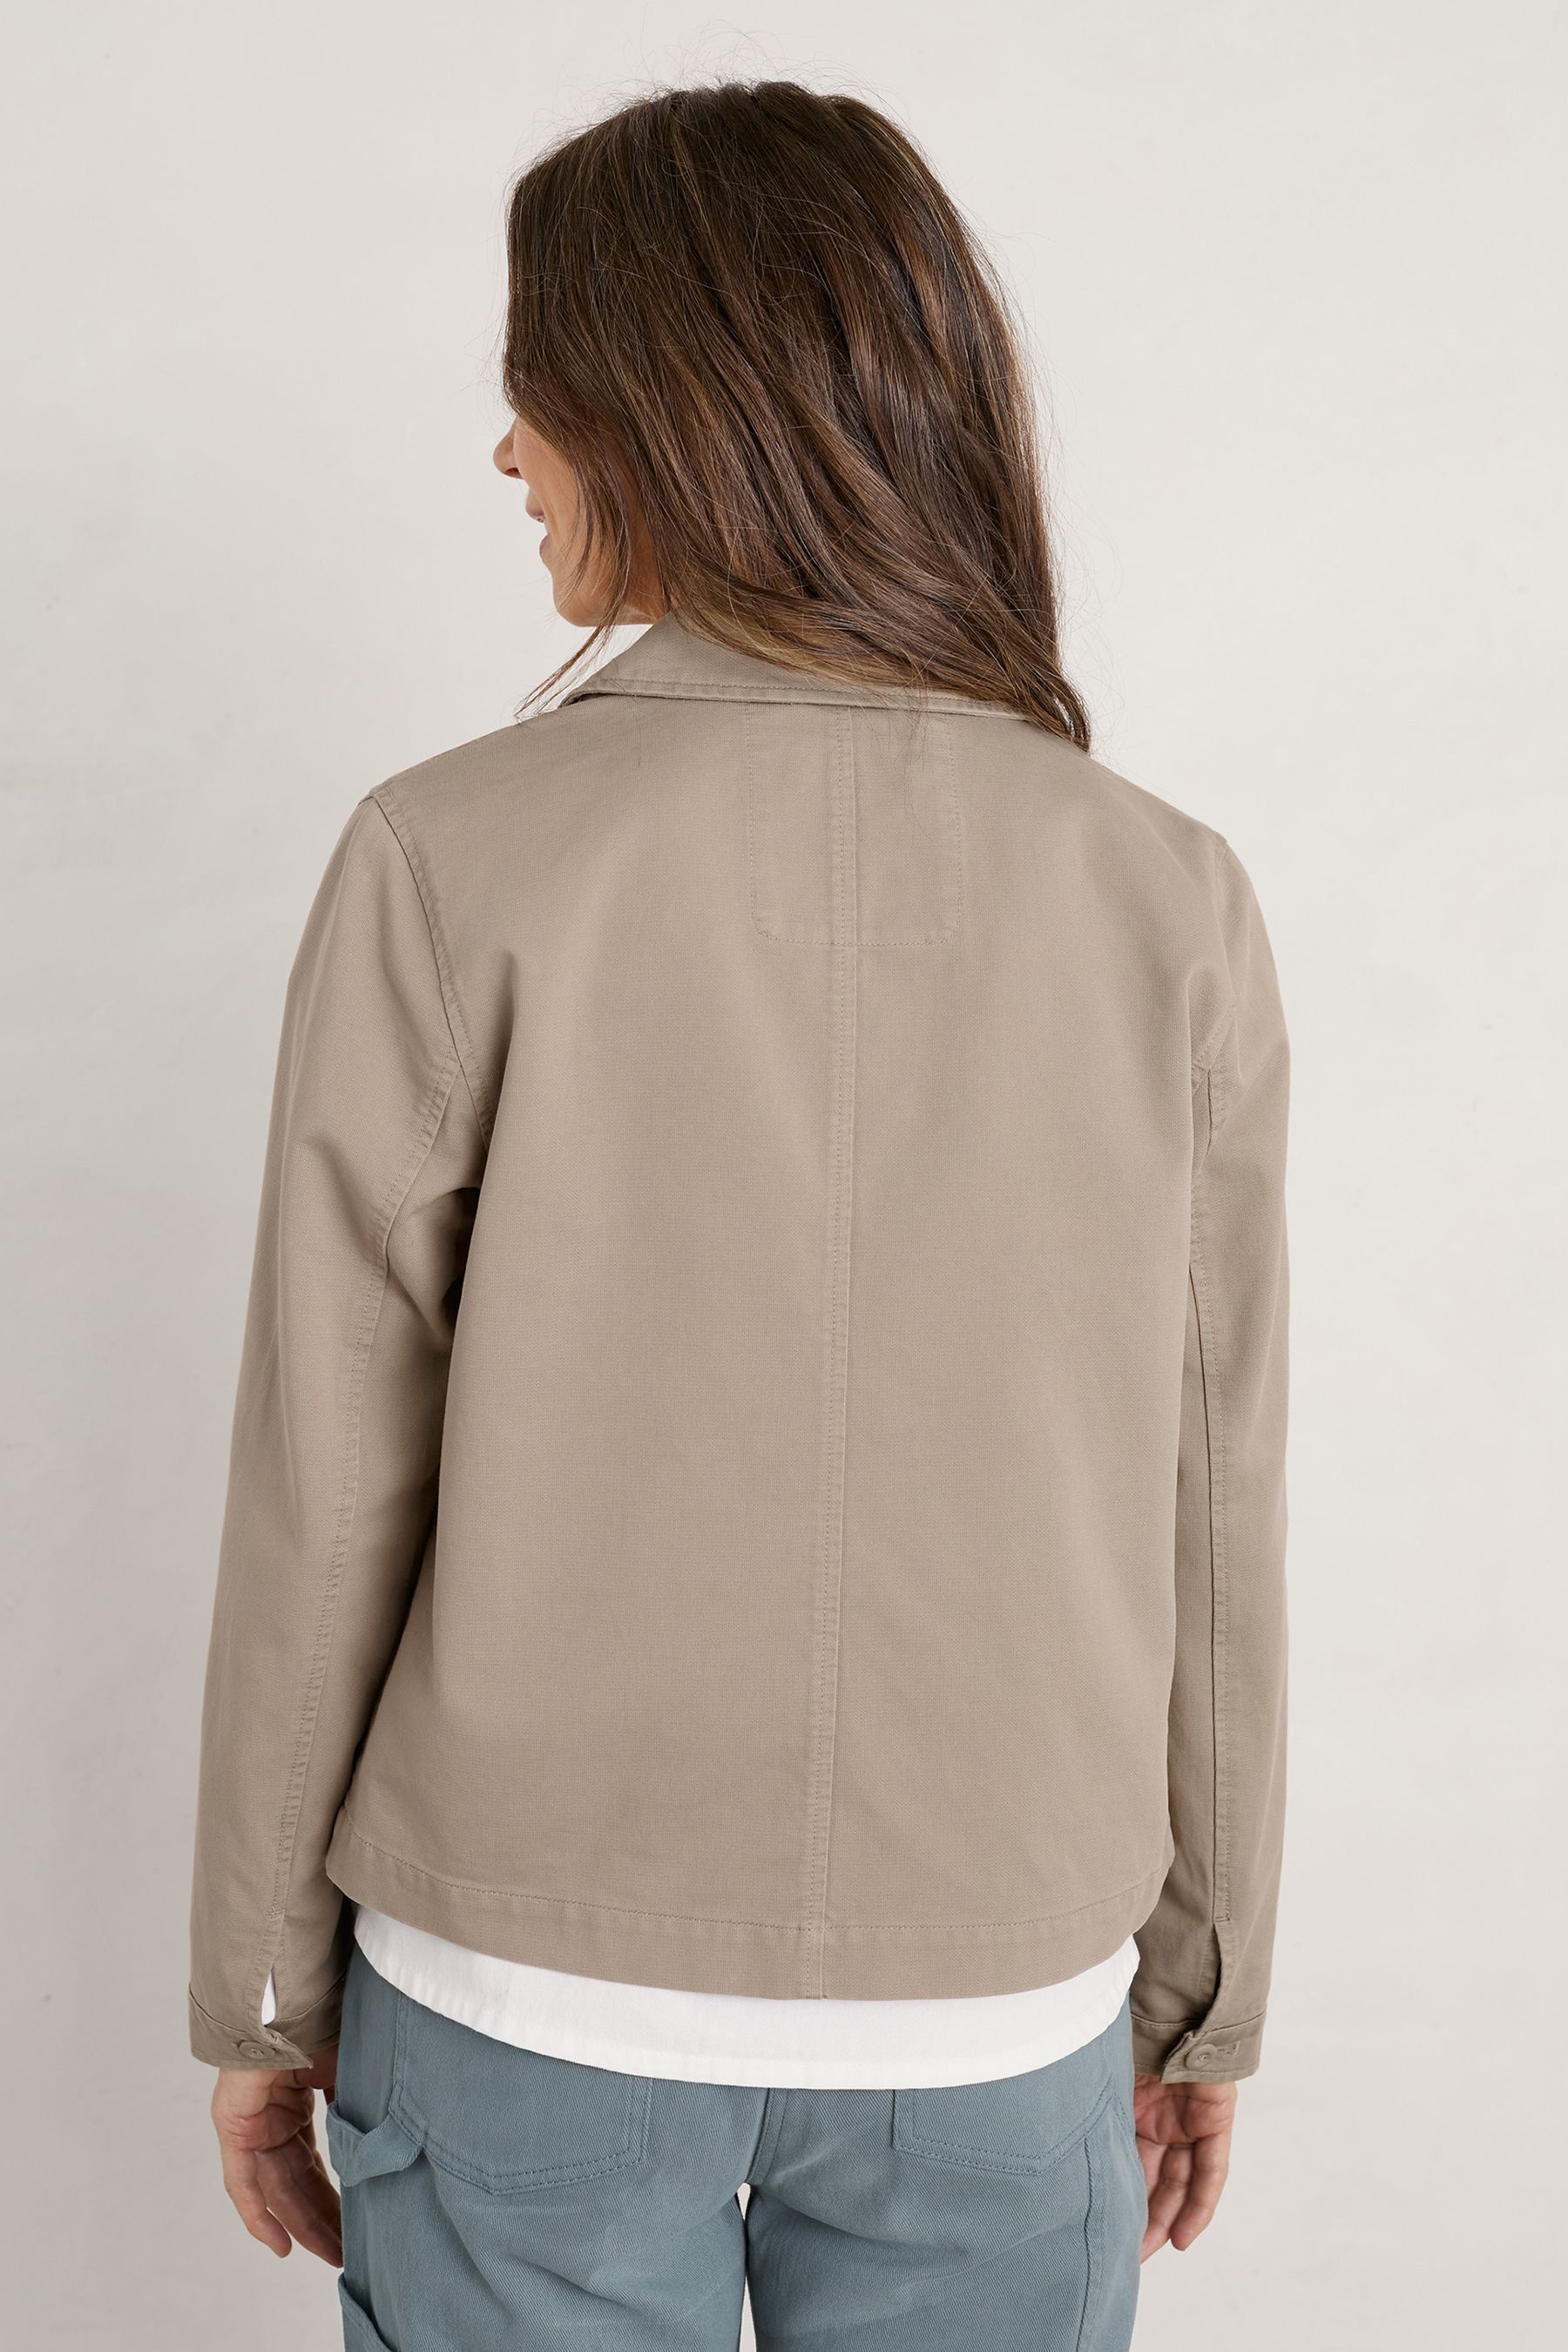 Buy Seasalt Cornwall Natural Coombe Lane Jacket from the Next UK online ...